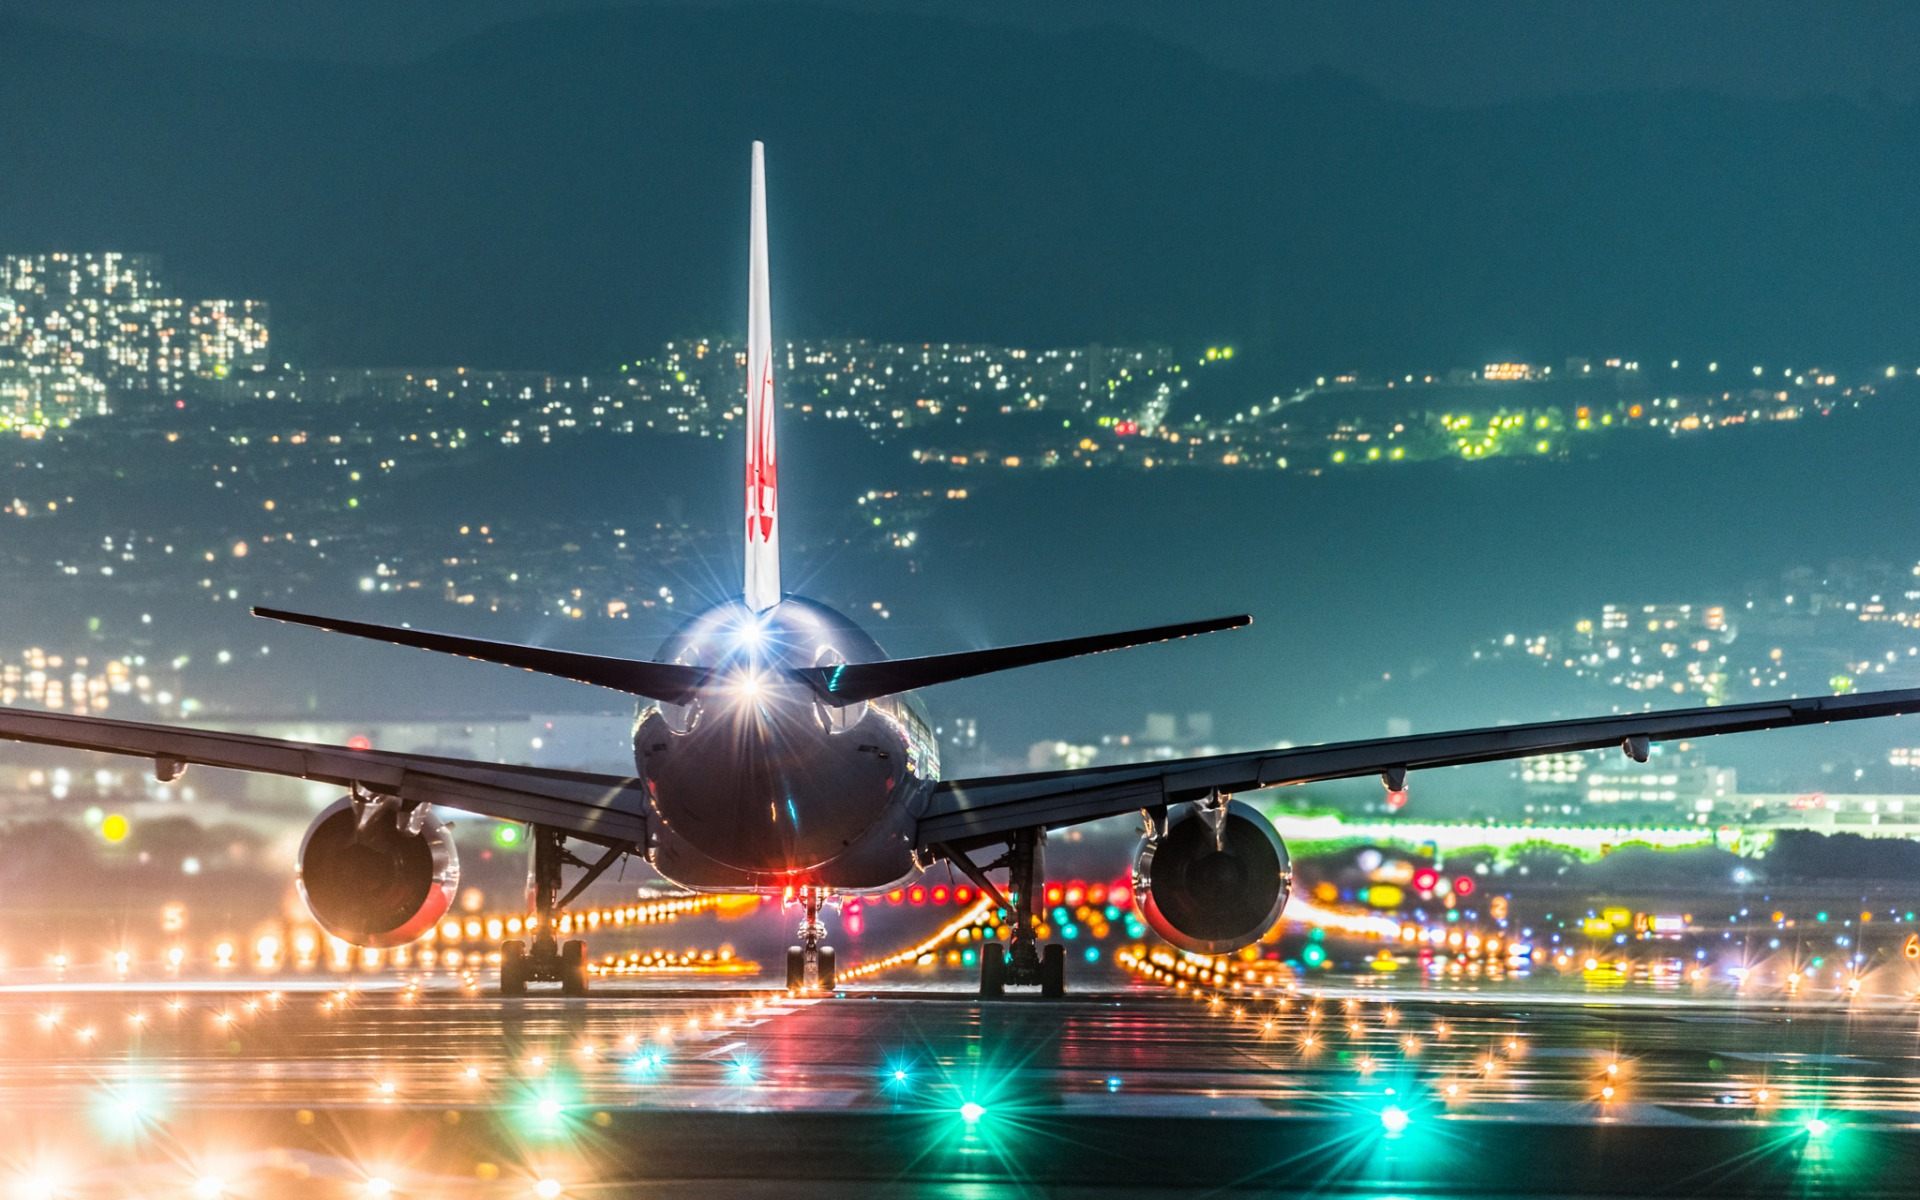 airport-night-1080p-wallpapers